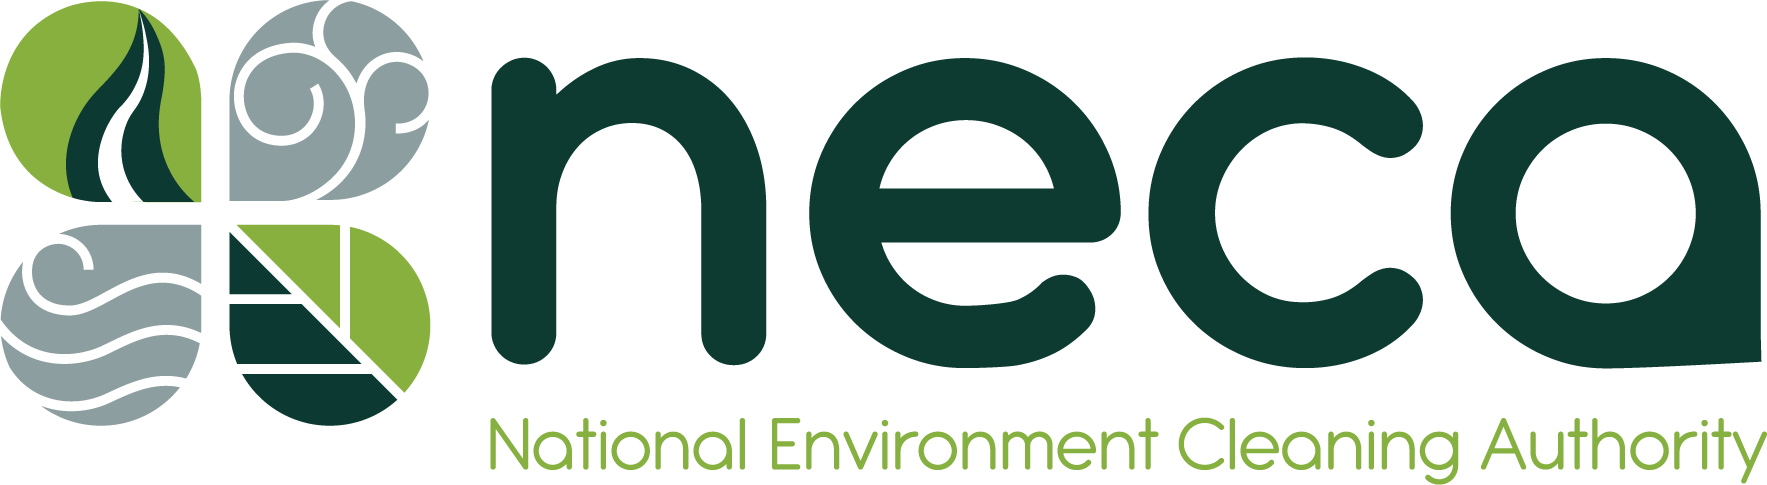 National Environment Cleaning Authority (NECA)